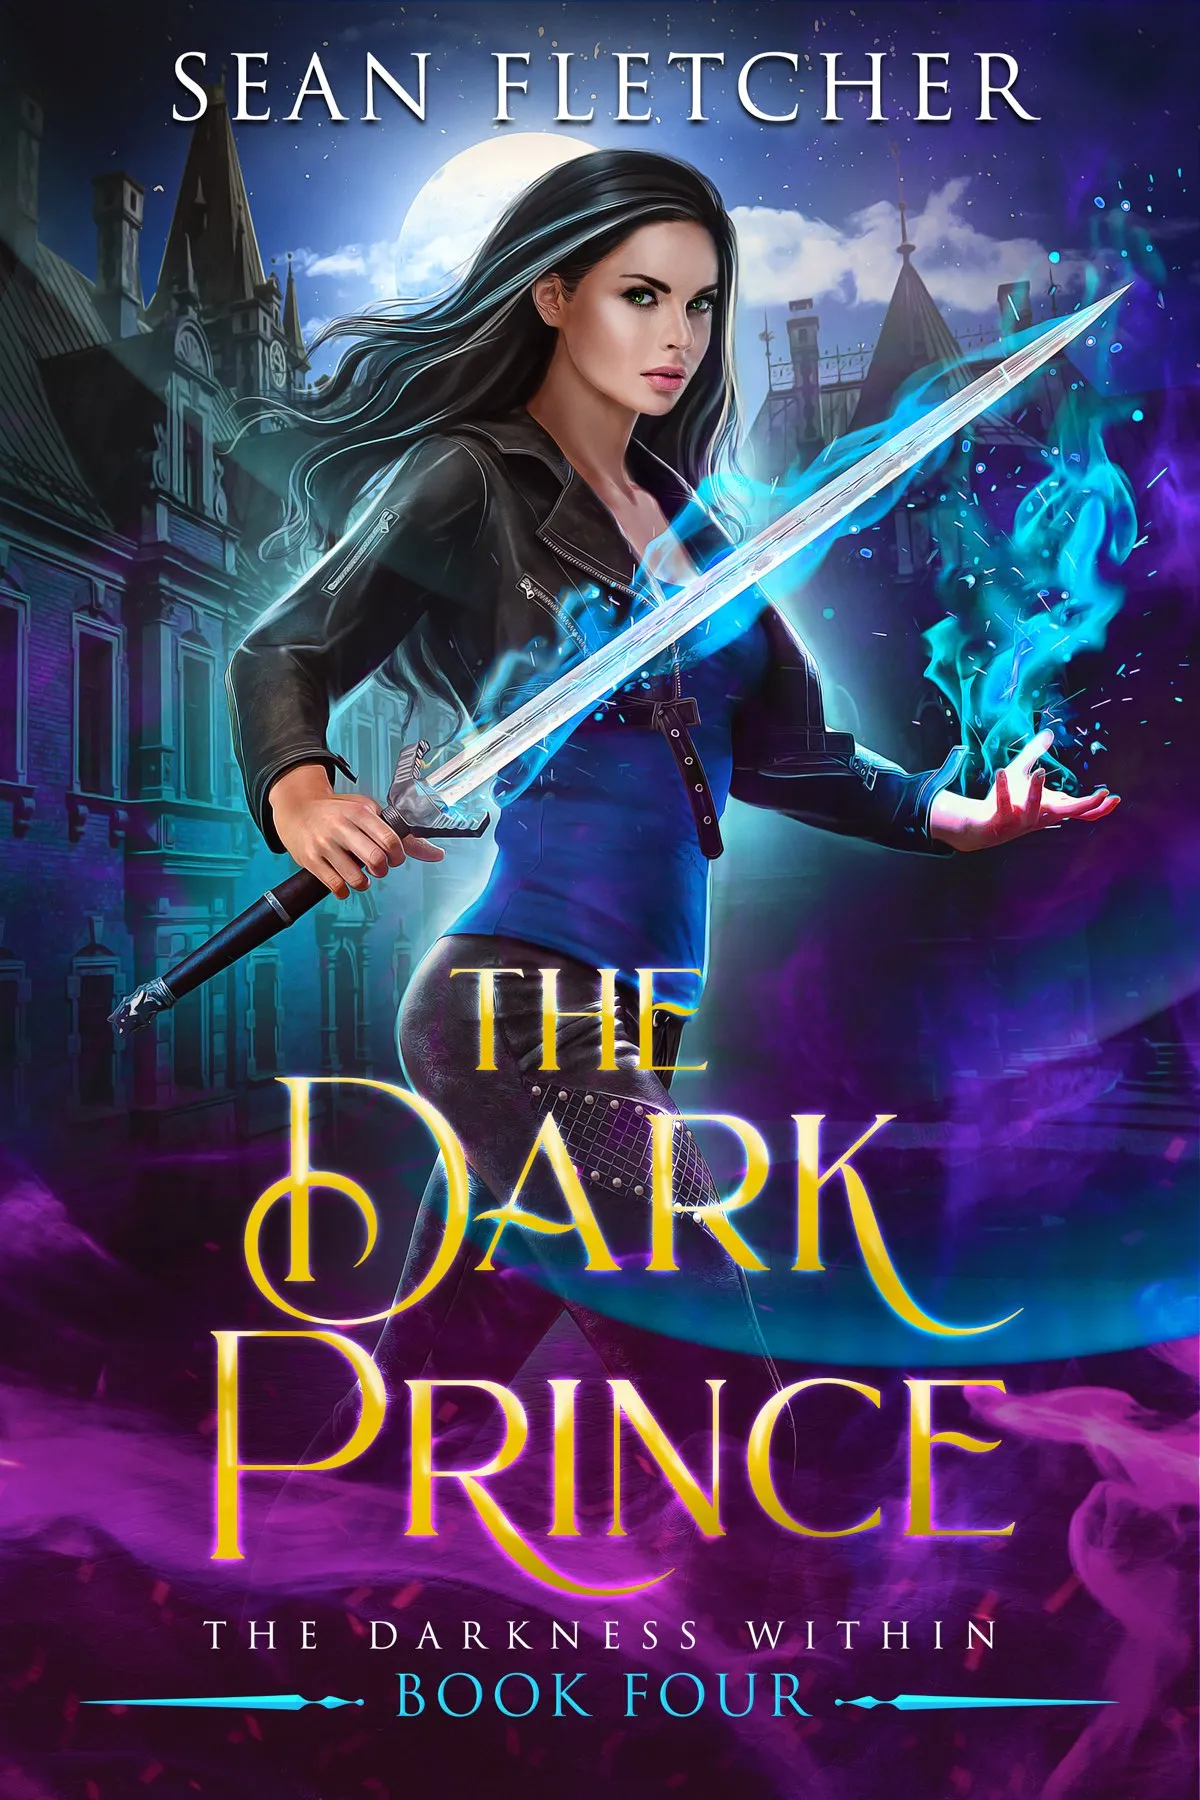 The Dark Prince (The Darkness Within #4)